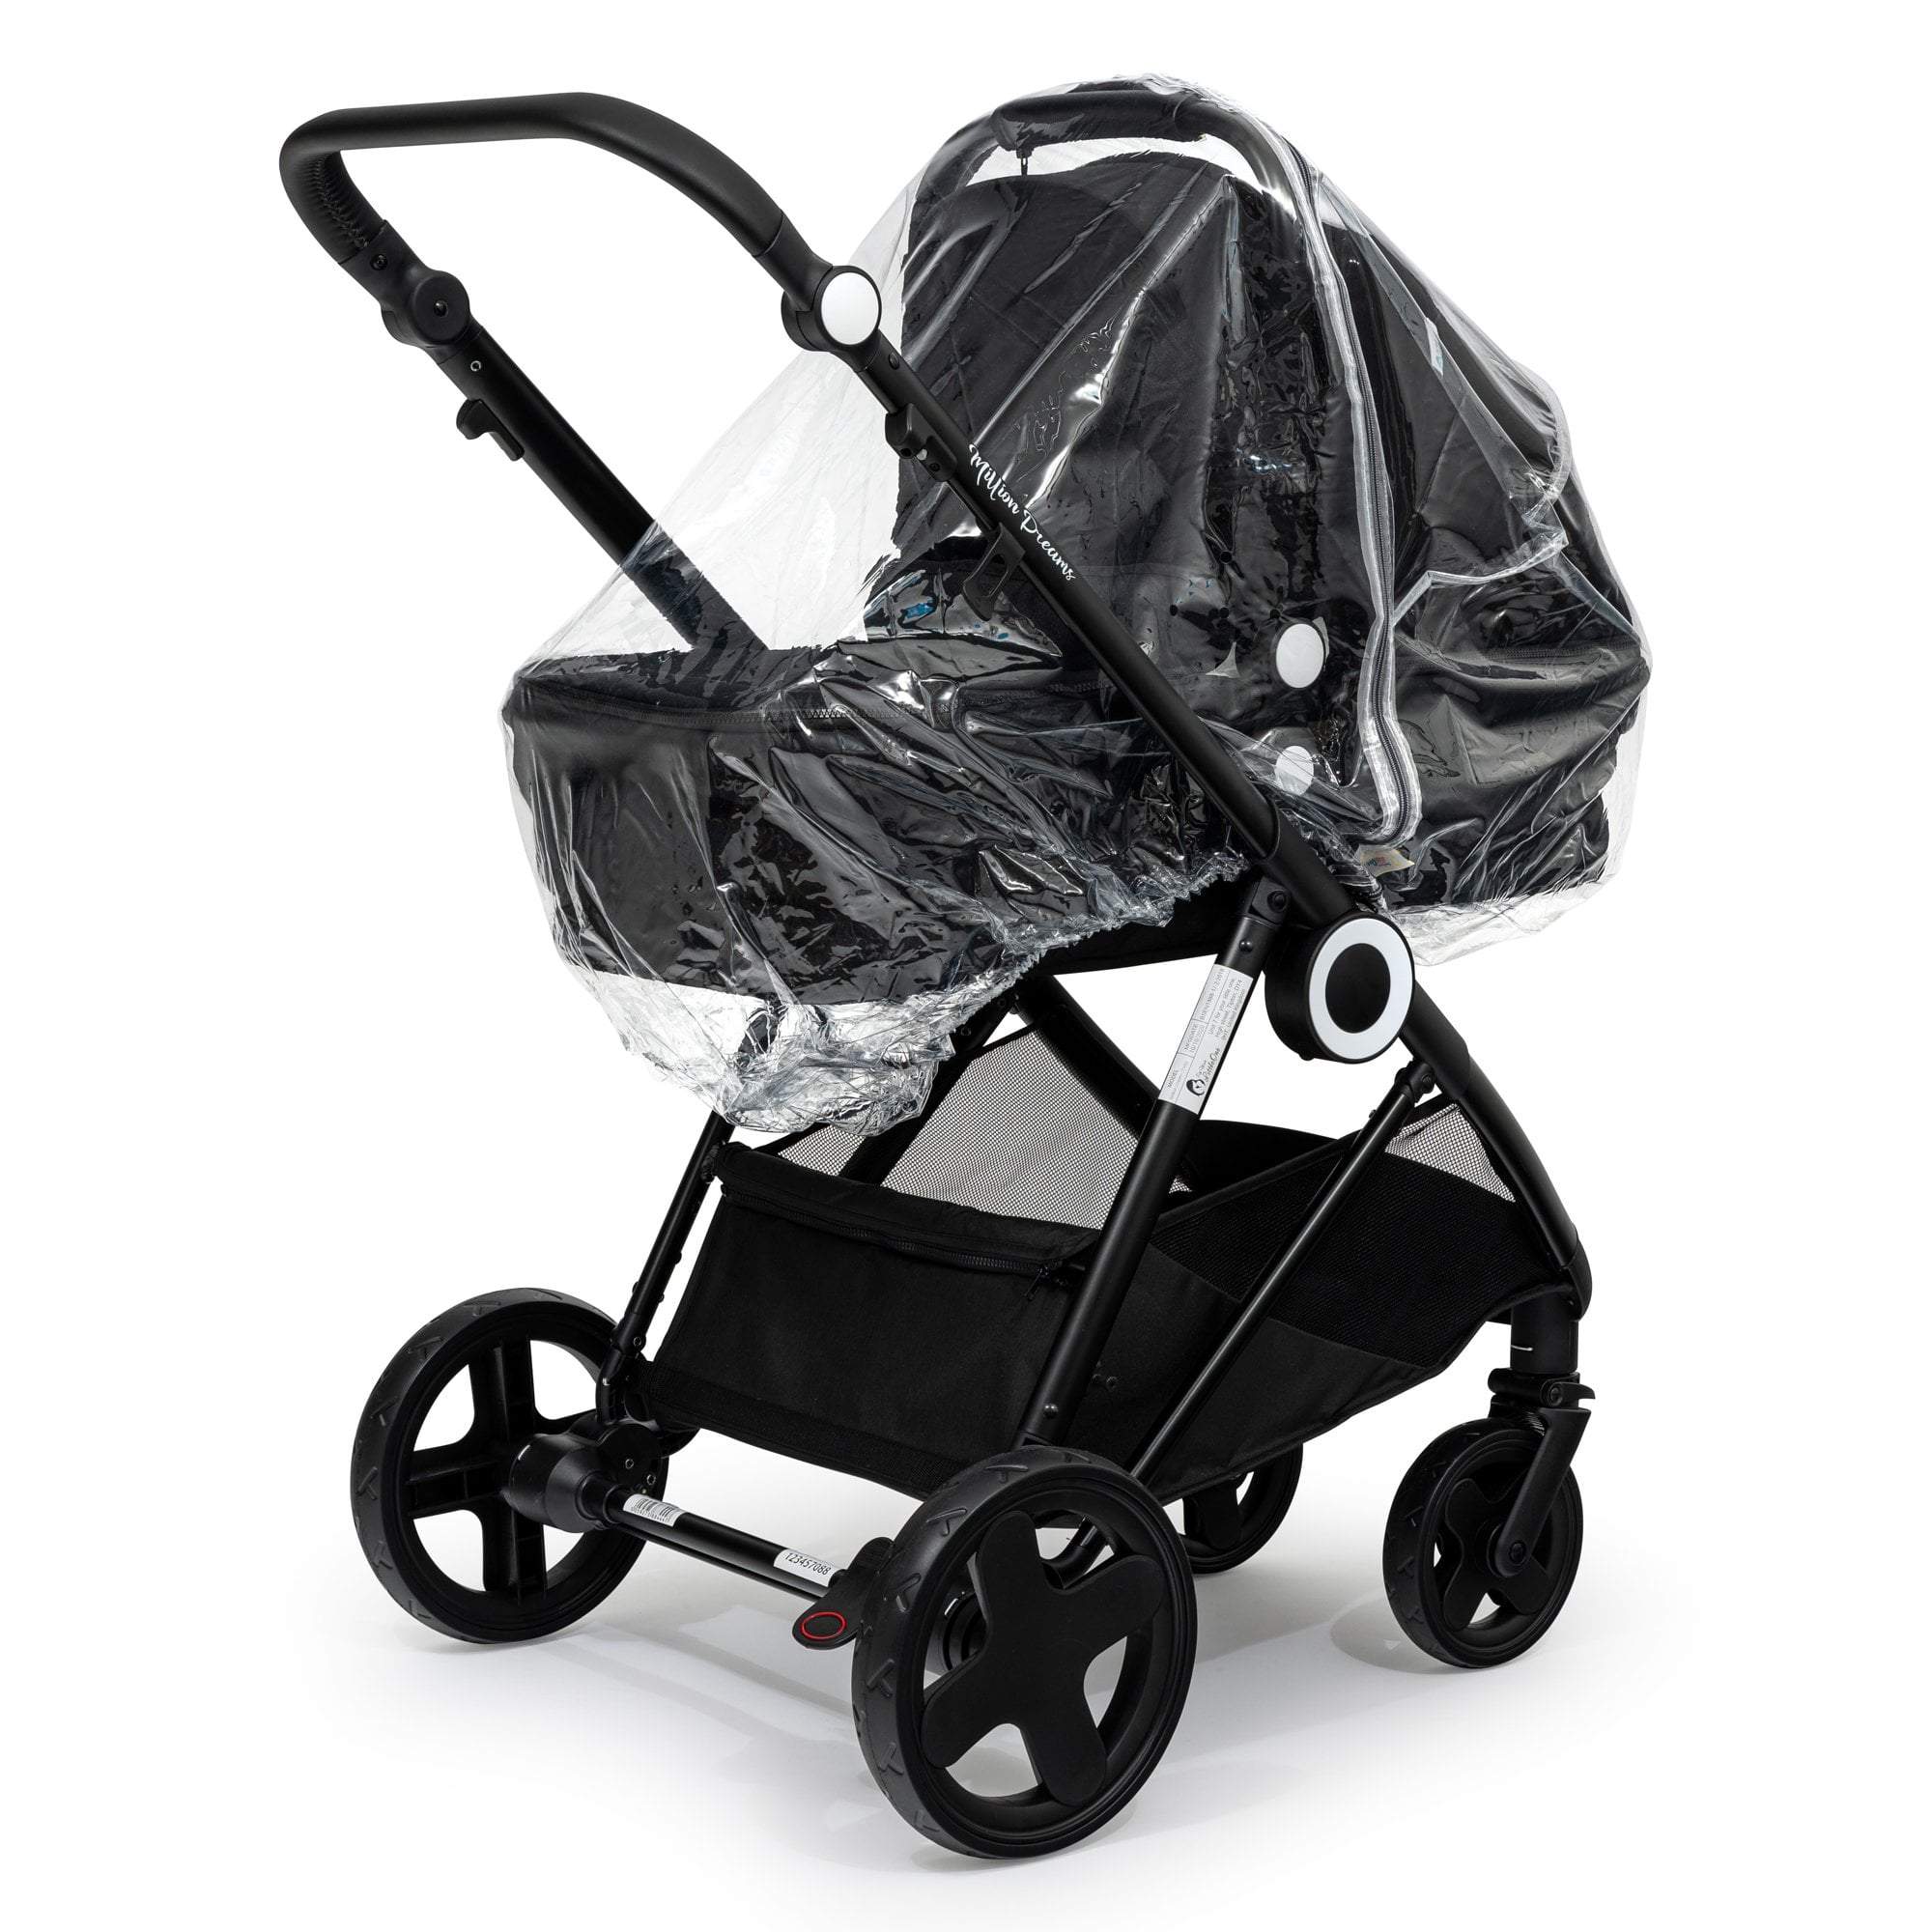 Carrycot Raincover Compatible With Nania - Fits All Models - For Your Little One